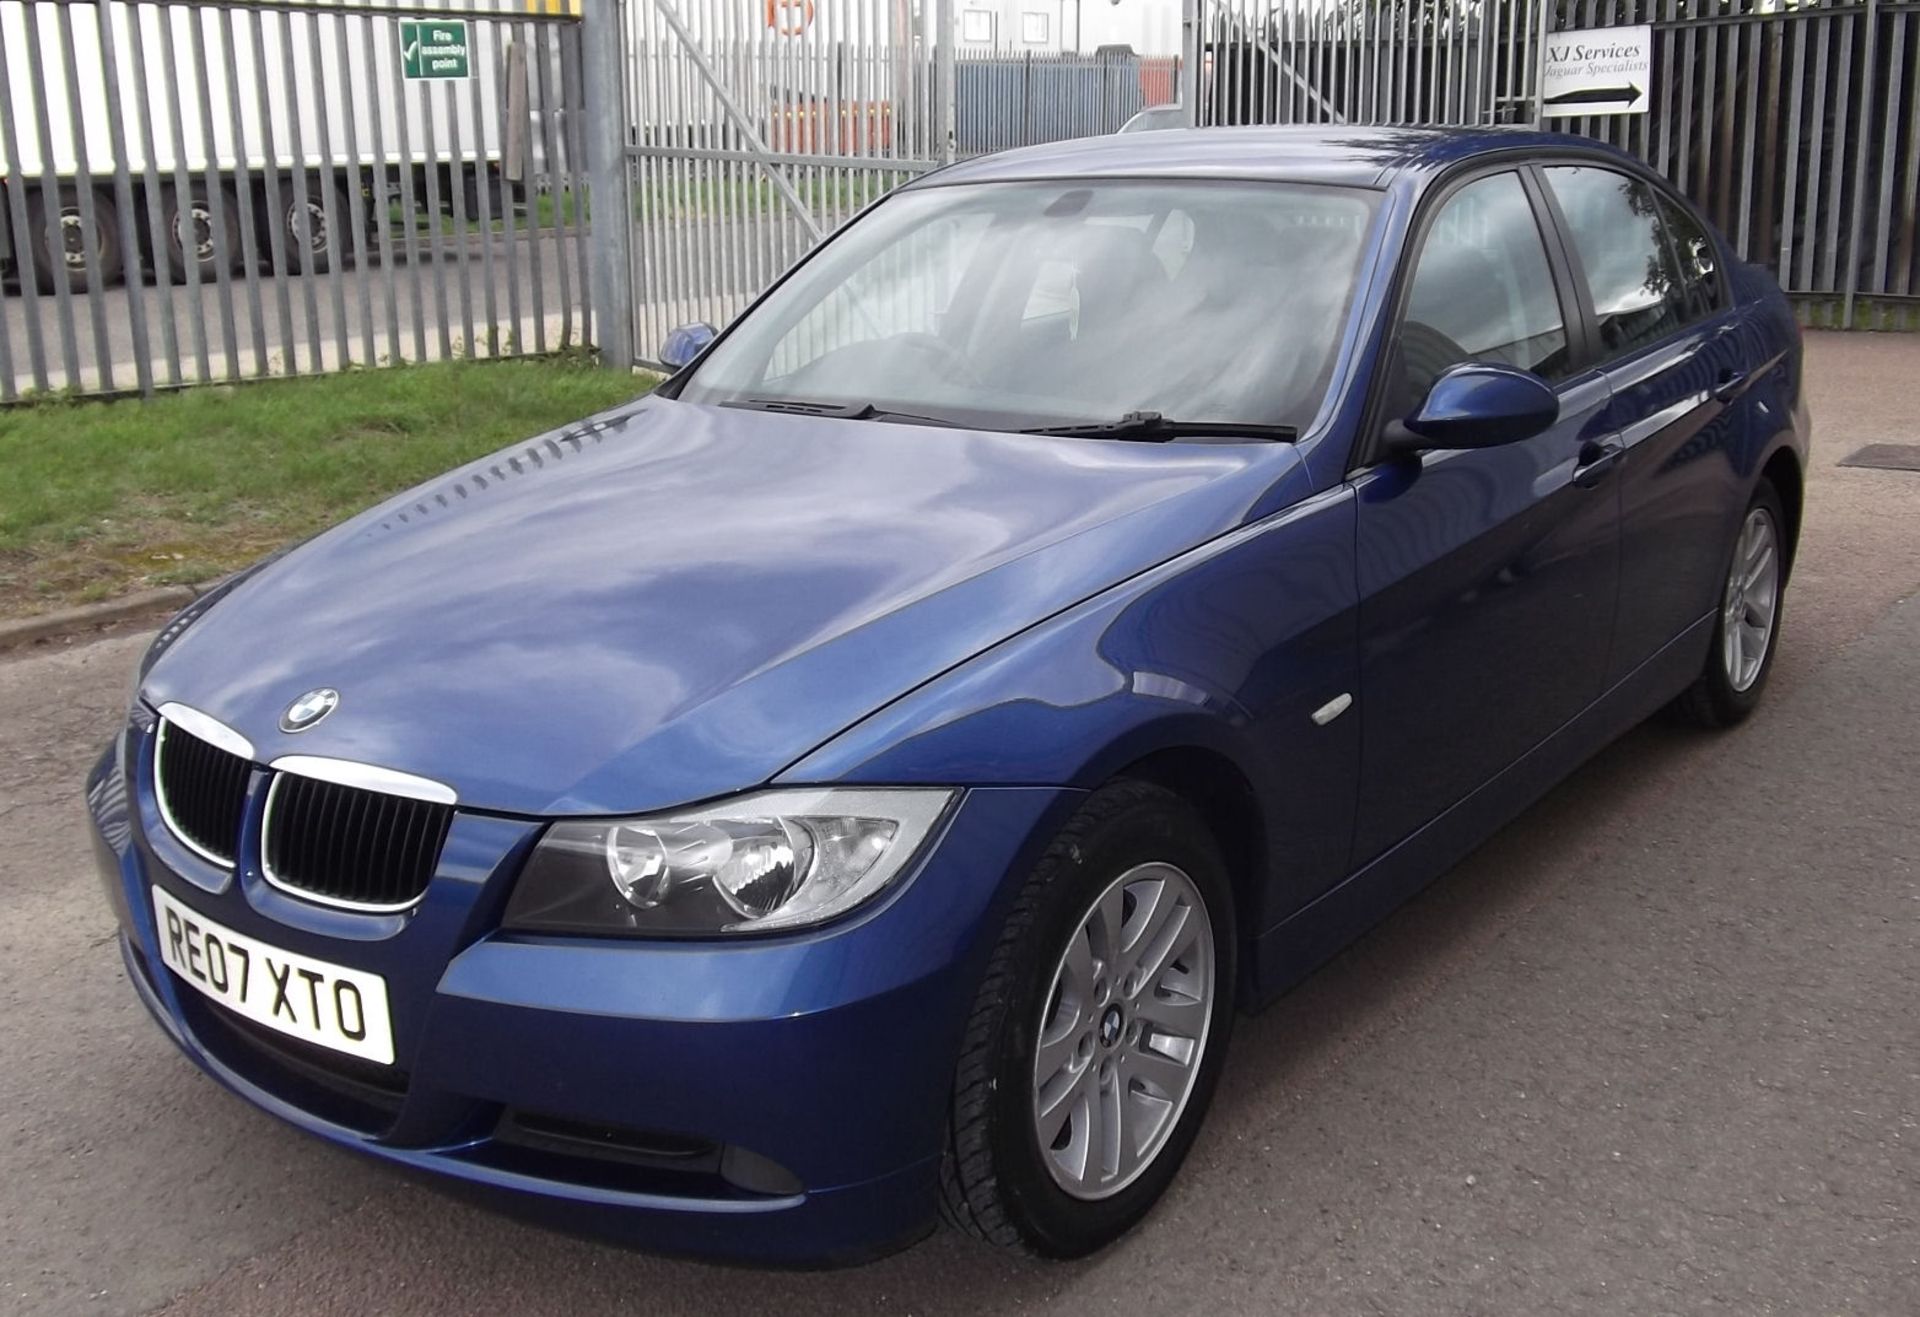 2007 BMW 318i SE 4 Door Saloon - CL505 - NO VAT ON THE HAMMER - Location: Corby